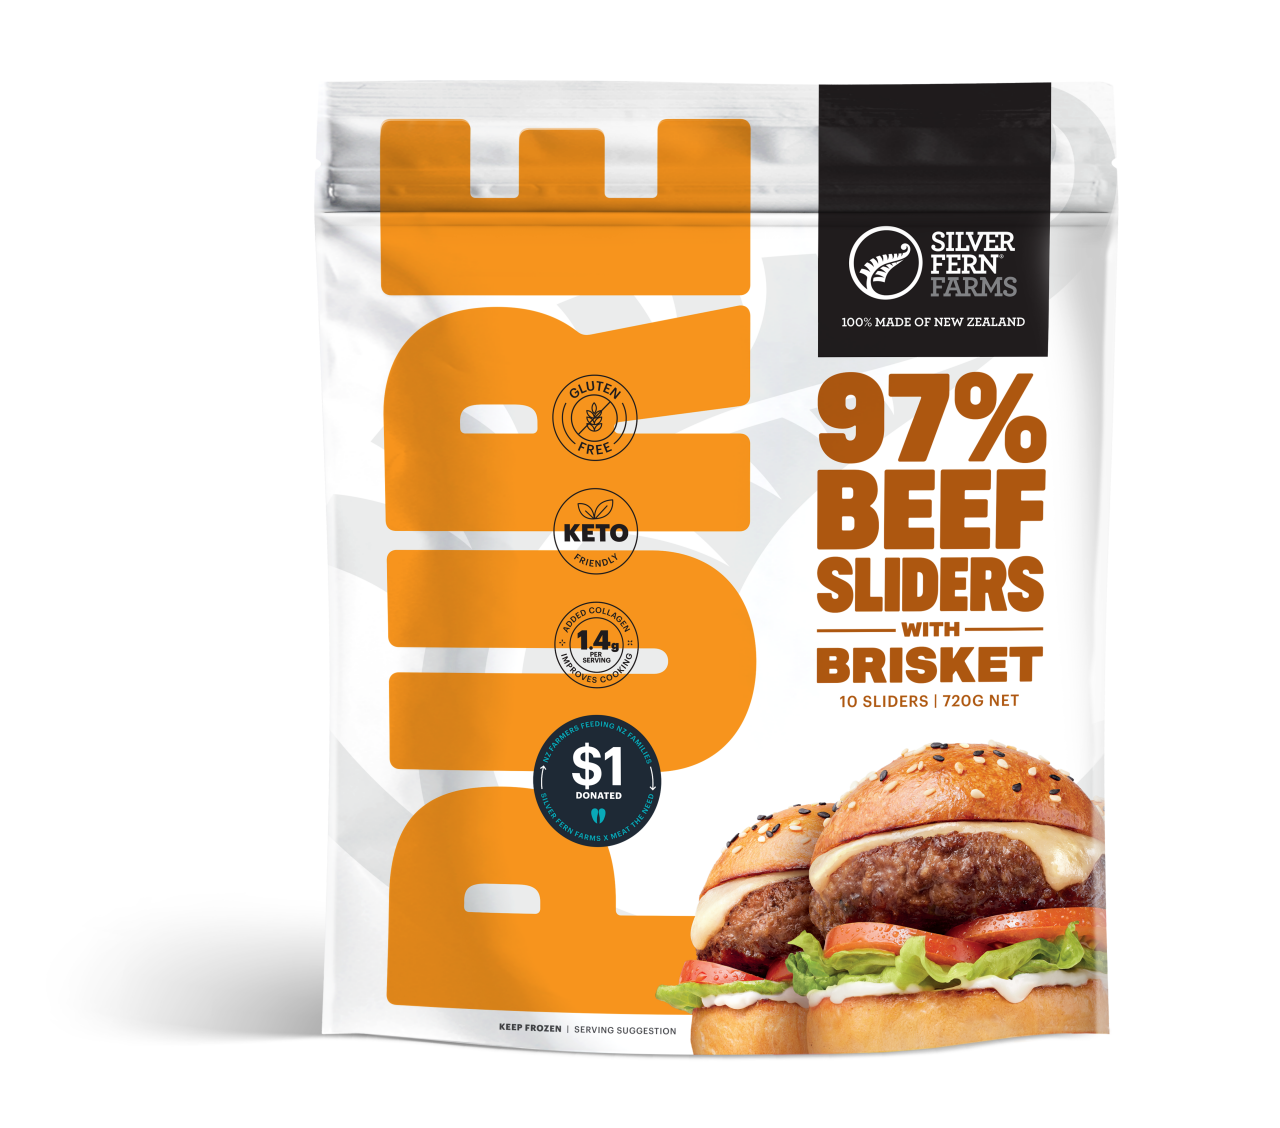 Pure Burger Packaging for beef sliders